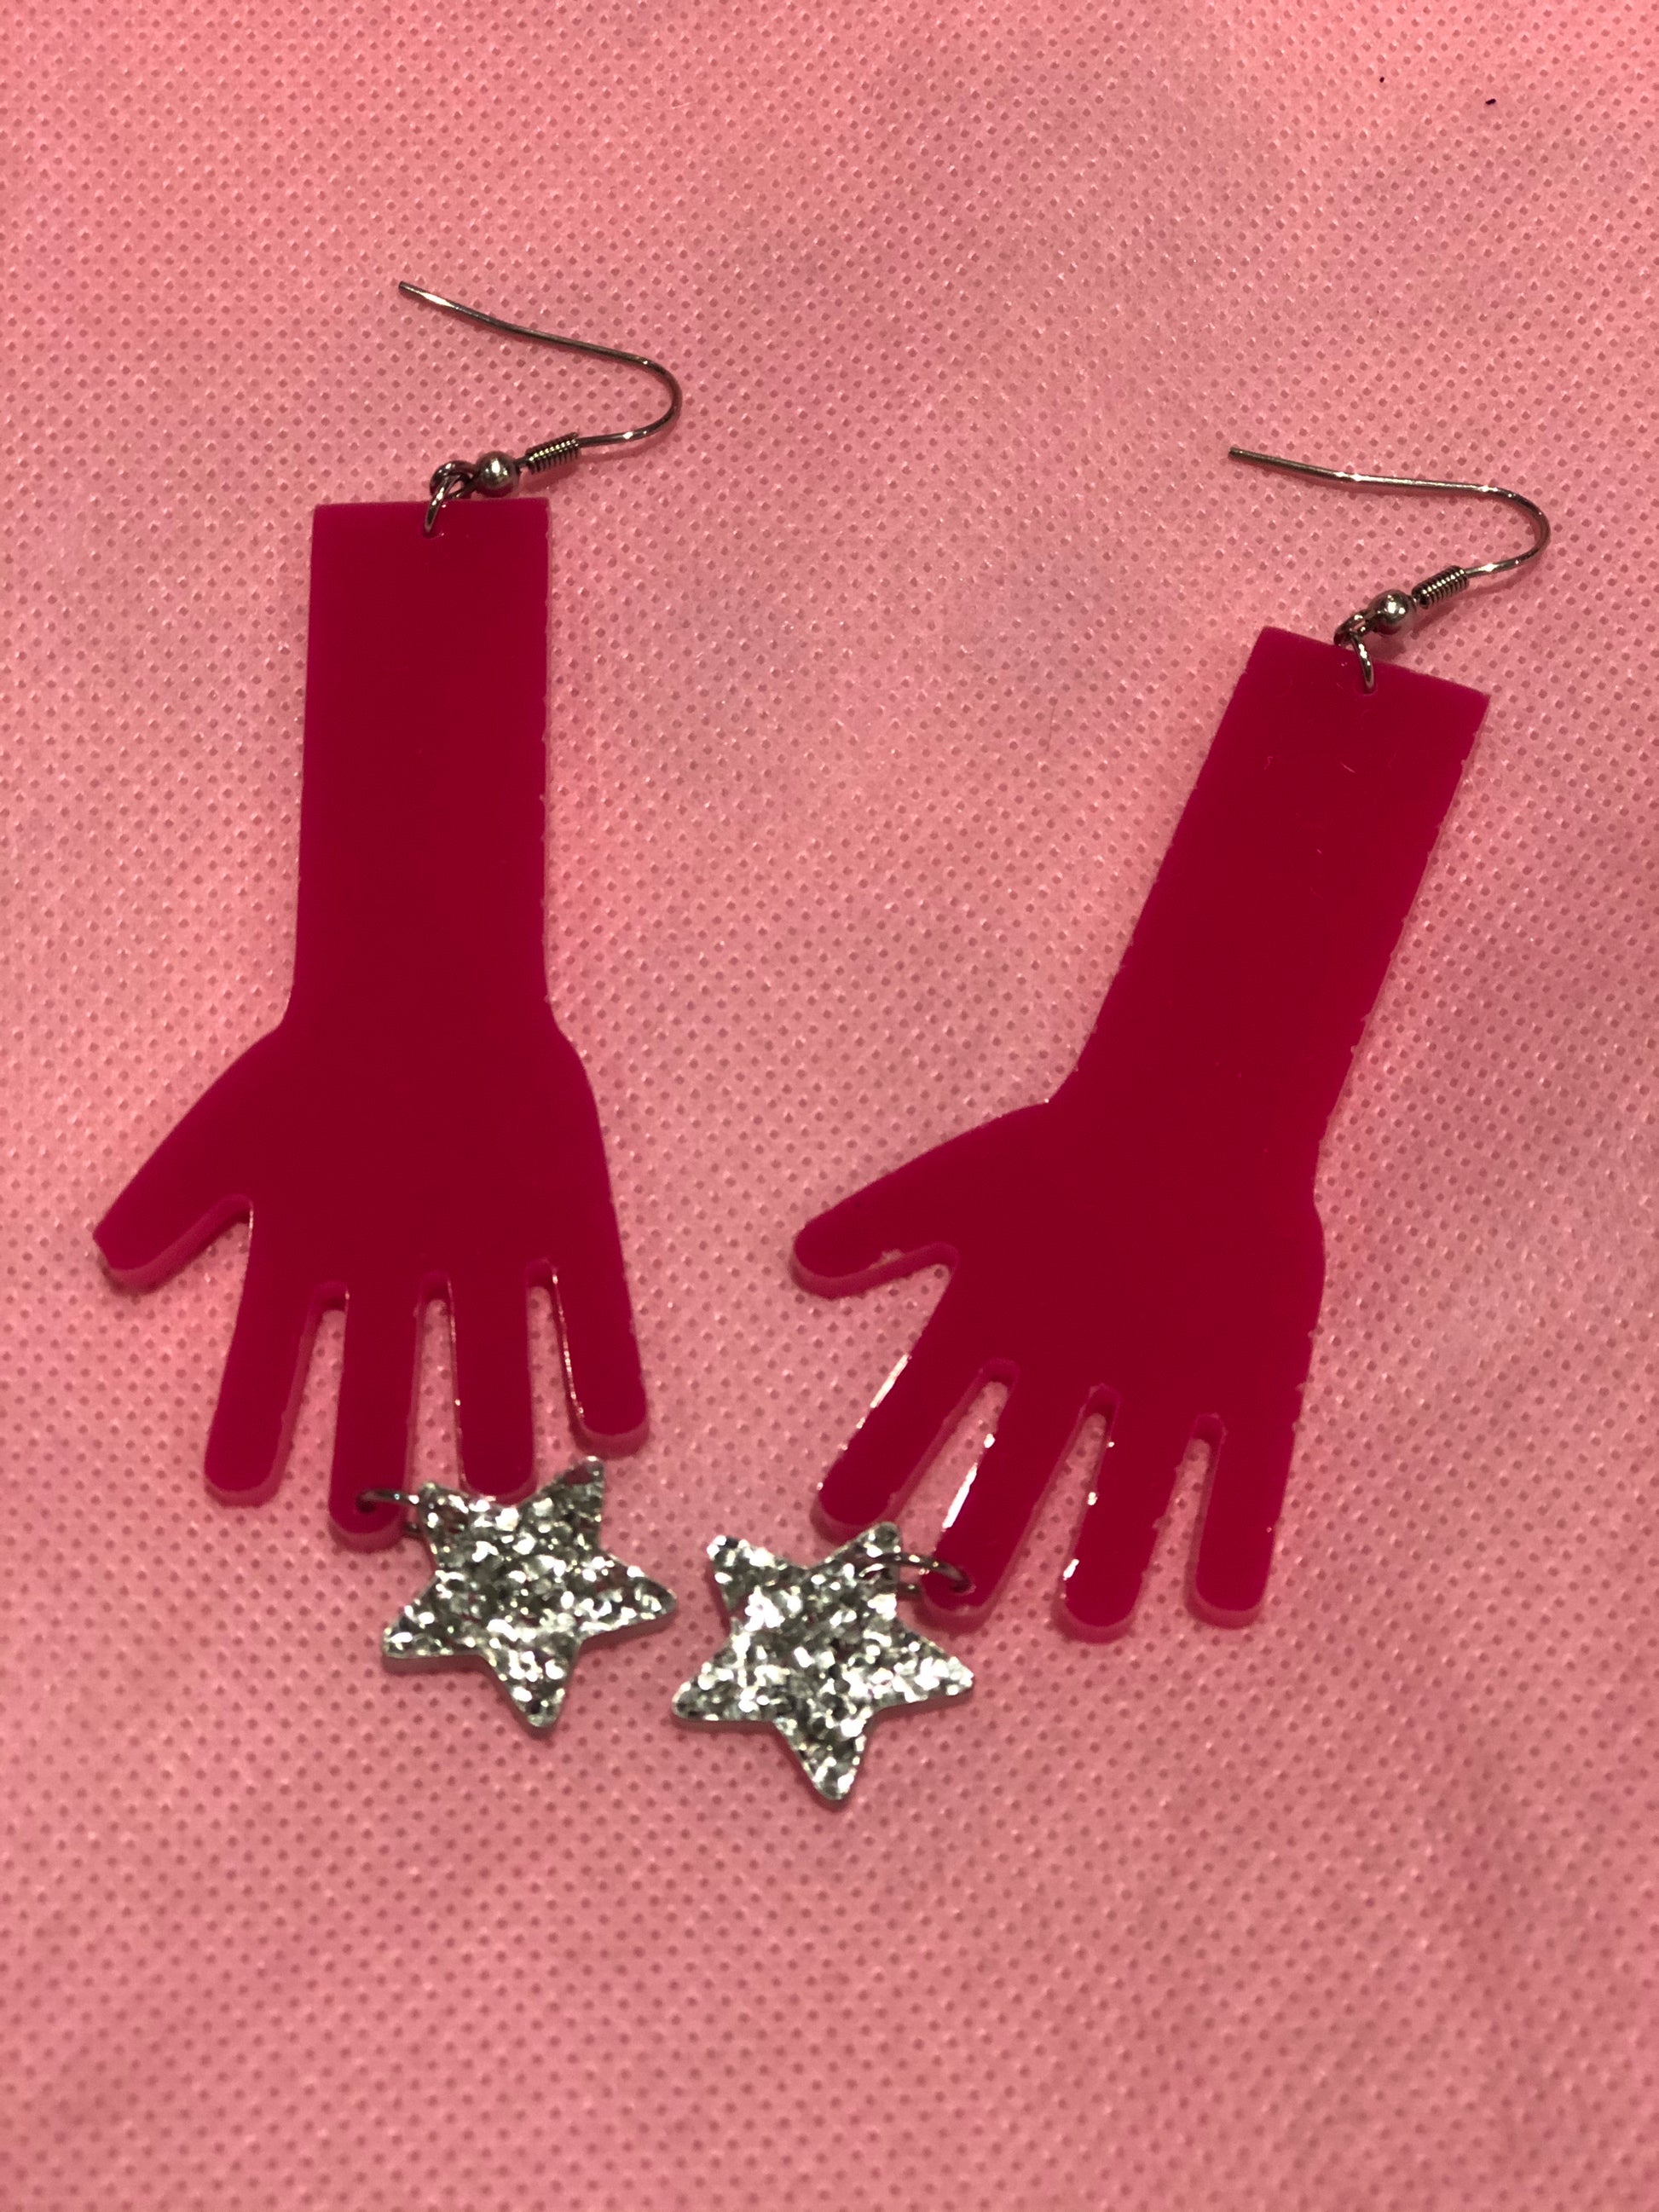 Hot Pink Hands with Silver Glitter Dangle Earrings by No Basic Bombshell - Spark Pretty